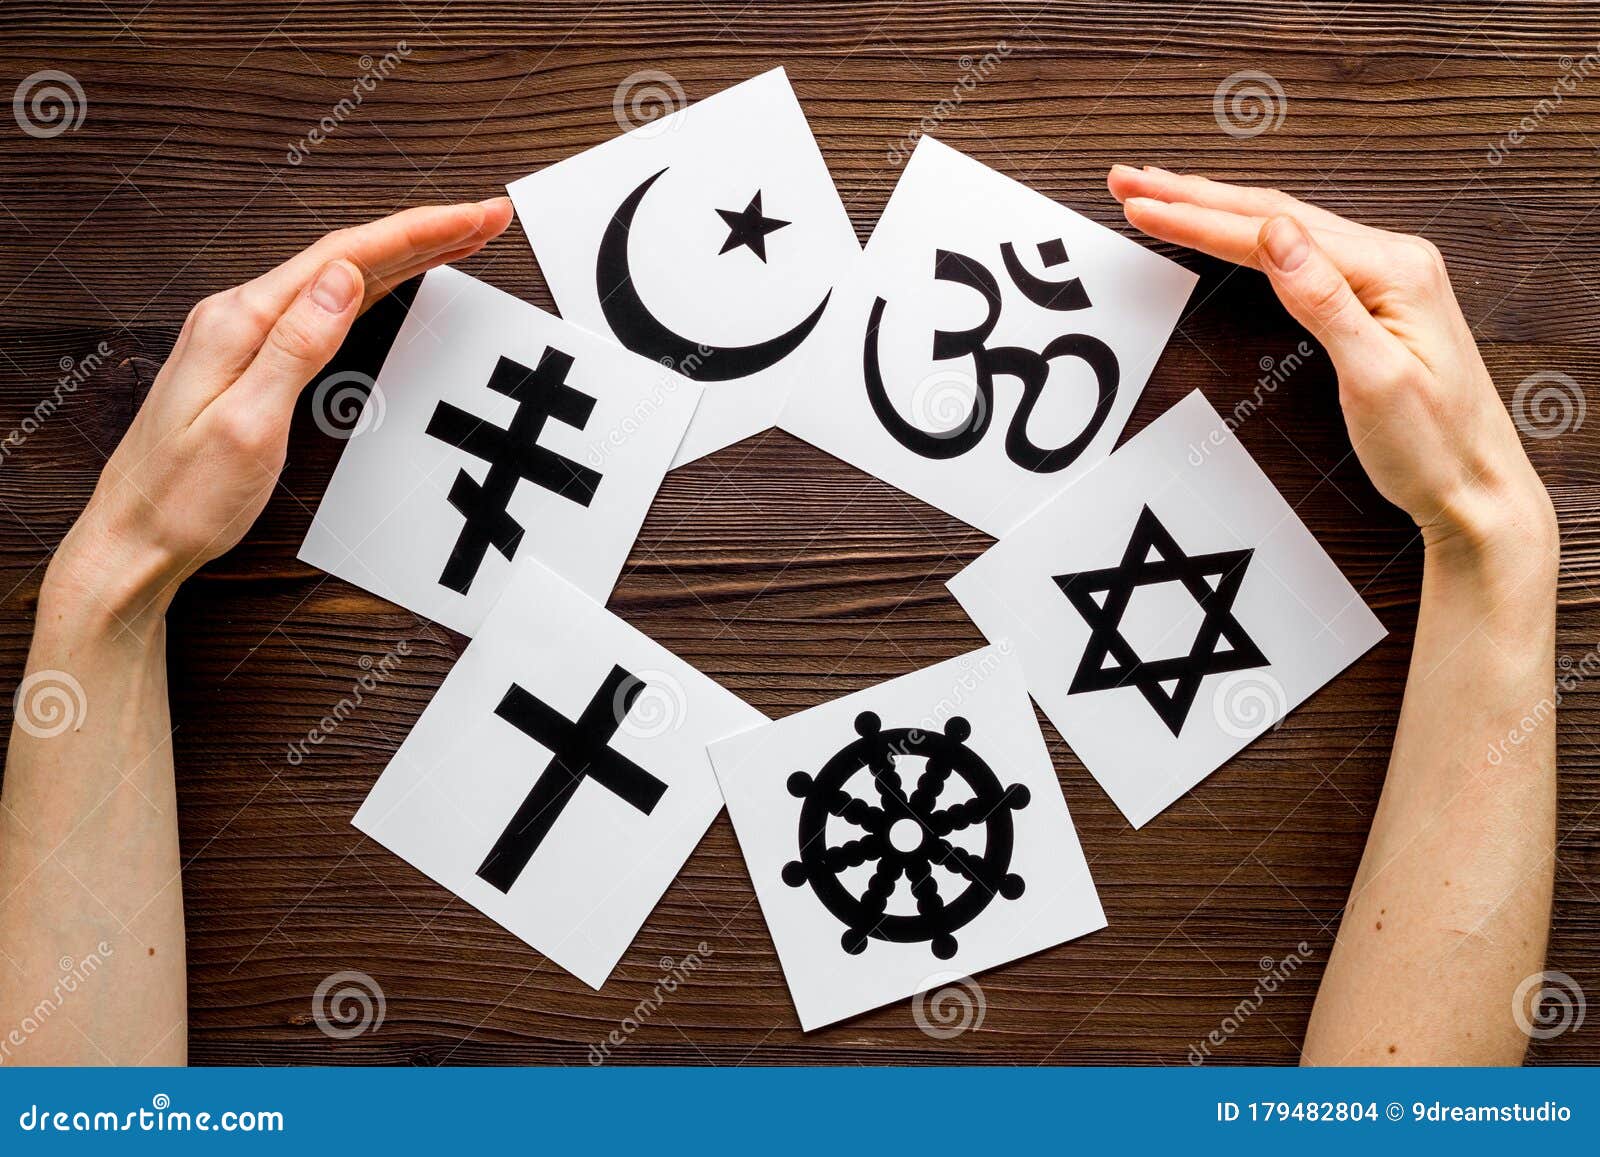 world religions concept. hands hugs christianity, catholicism, buddhism, judaism, islam s on wooden background top